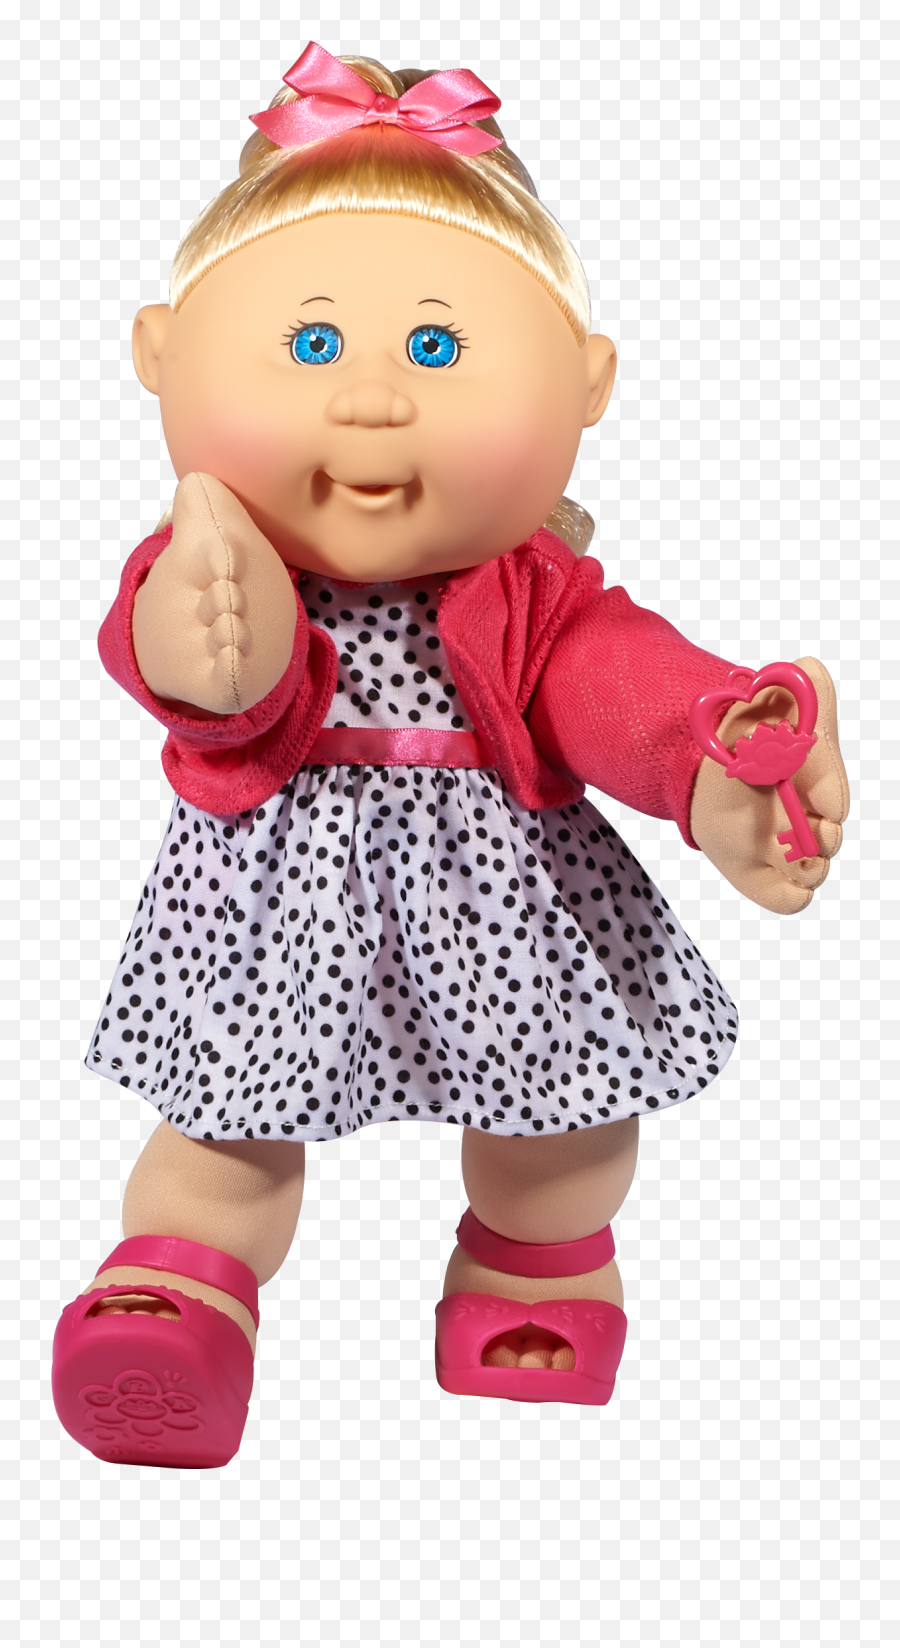 Cabbage Patch - Cabbage Patch Kids Transparent Emoji,Dancing Emoticon Doing Cabbage Patch